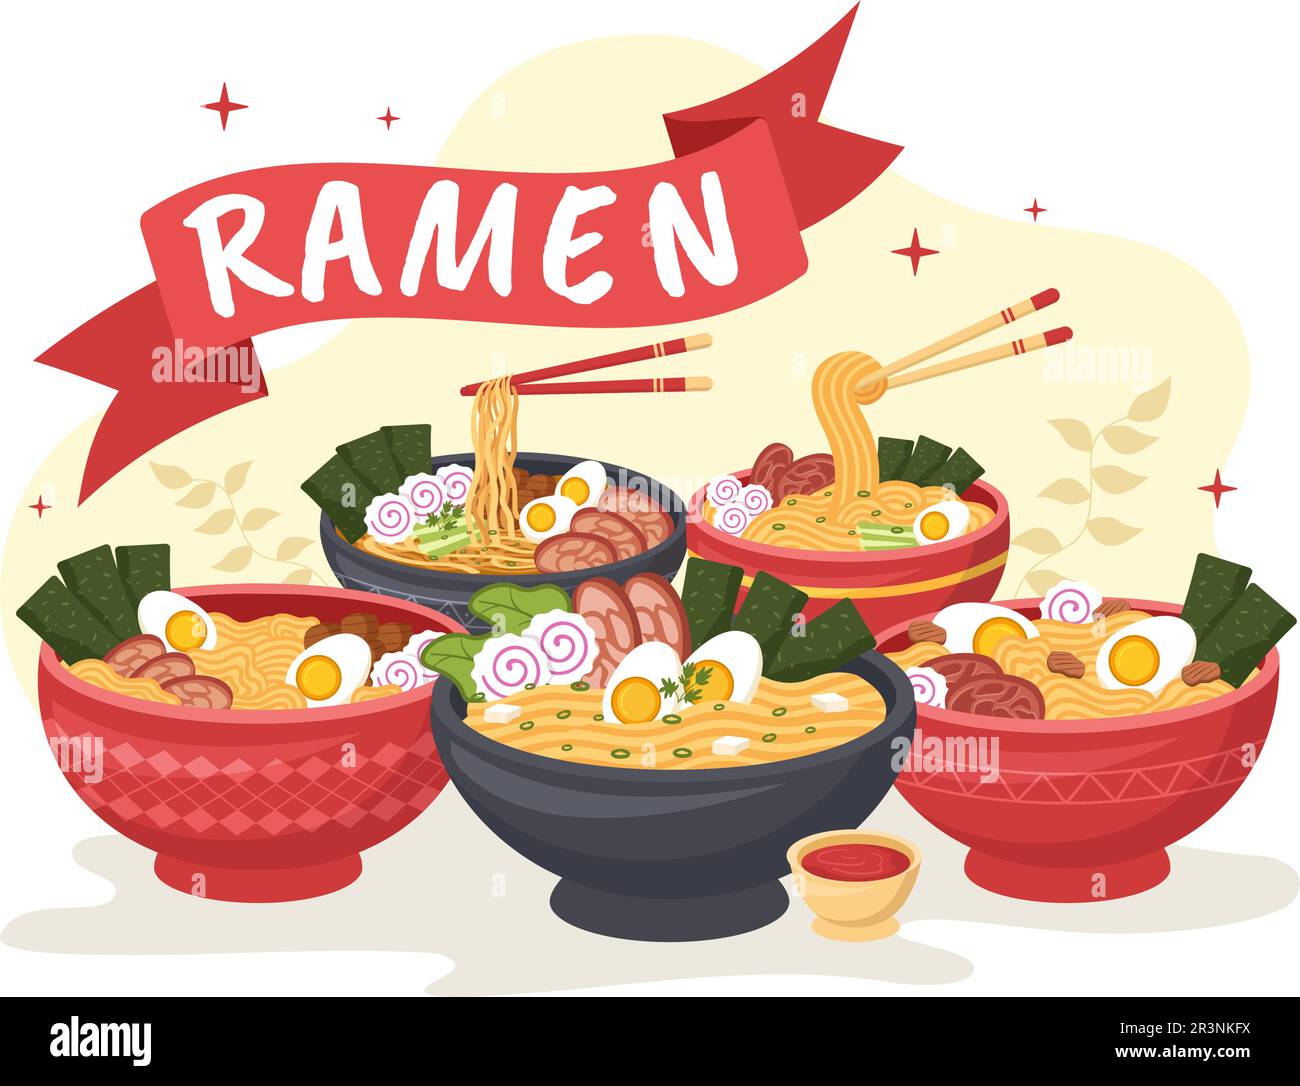 Ramen Vector Illustration of Japanese Food with Noodle, Chopsticks, Miso Soup, Egg lessed and Grilled Nori in Flat Cartoon Hand Drawed Templates Illustrazione Vettoriale